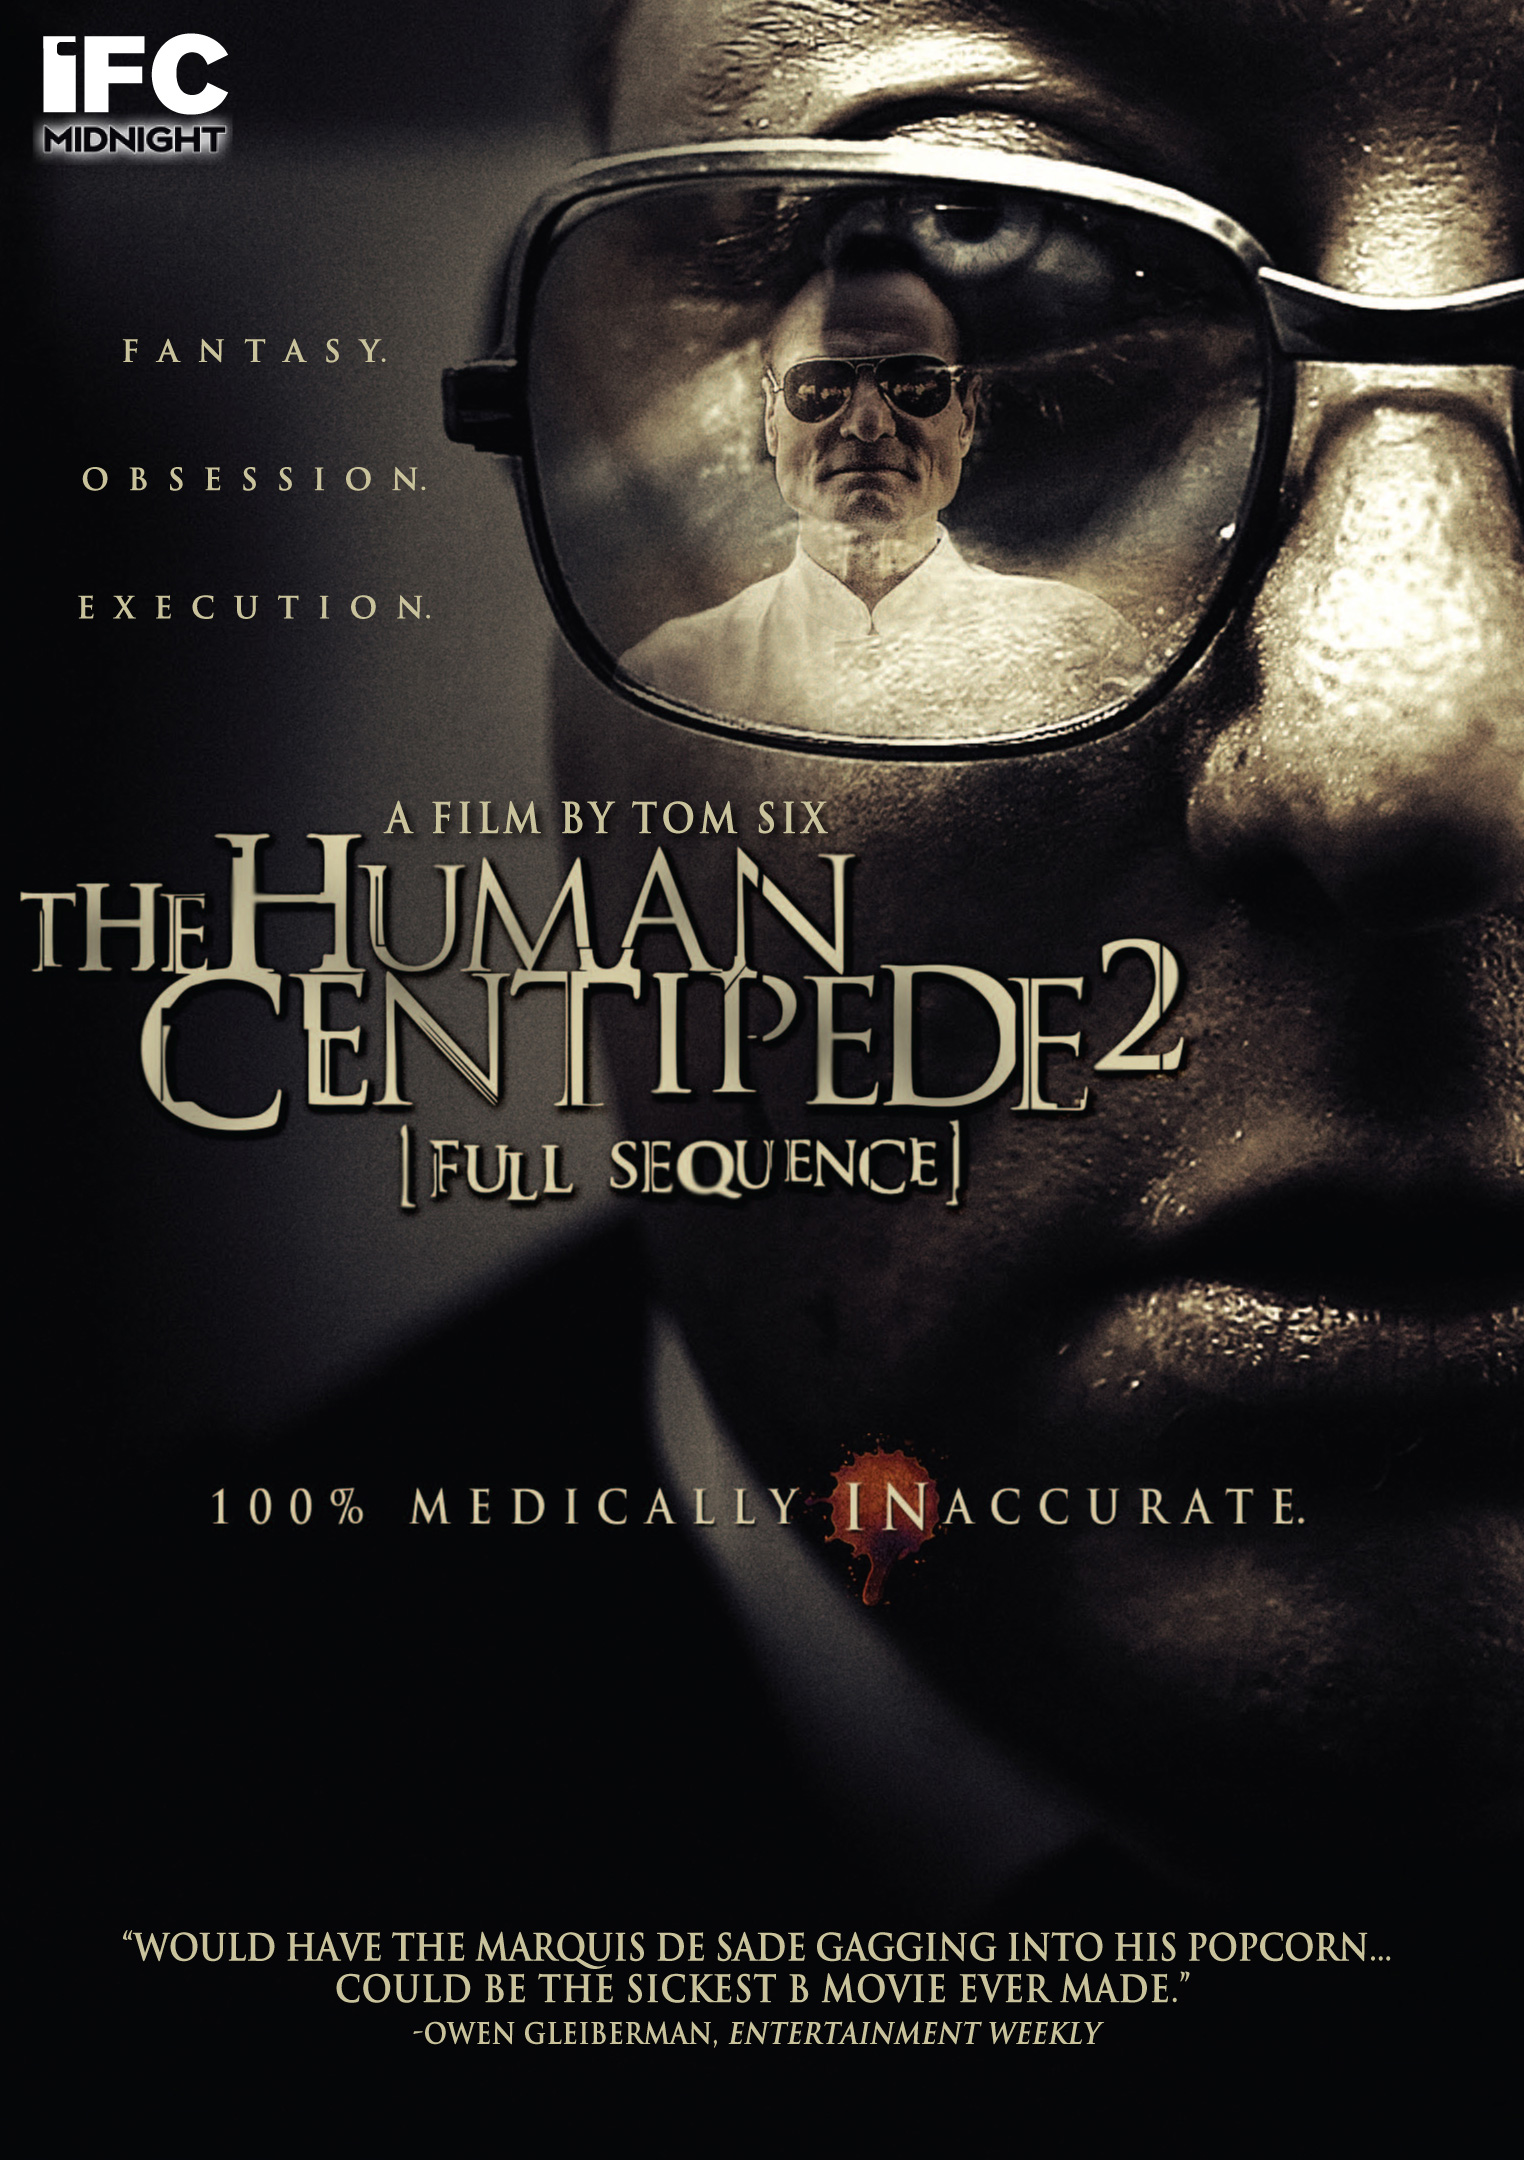 The Human Centipede II (Full Sequence) (UNRATED DIRECTORS CUT) /   2 (  ) (  / Tom Six, Six Entertainment) [2011 ., BDSM, Horror, Thriller, Fetish, Copro, 720p]